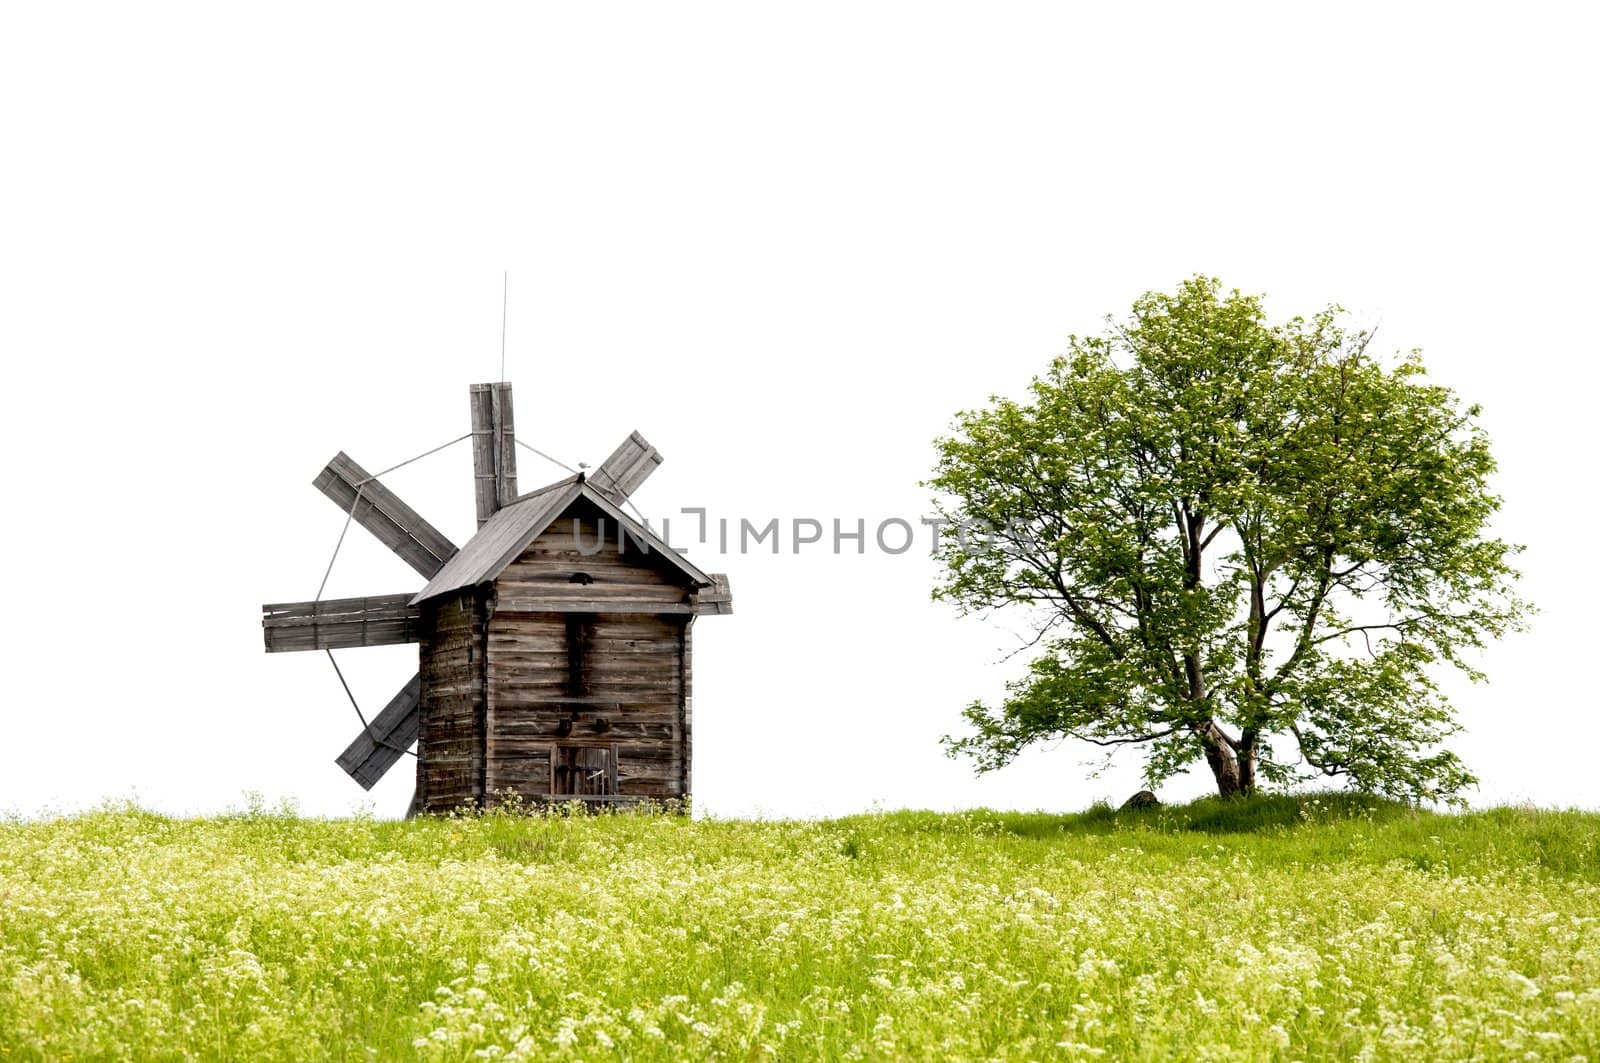 Lanscape with old windmills and a lonely tree